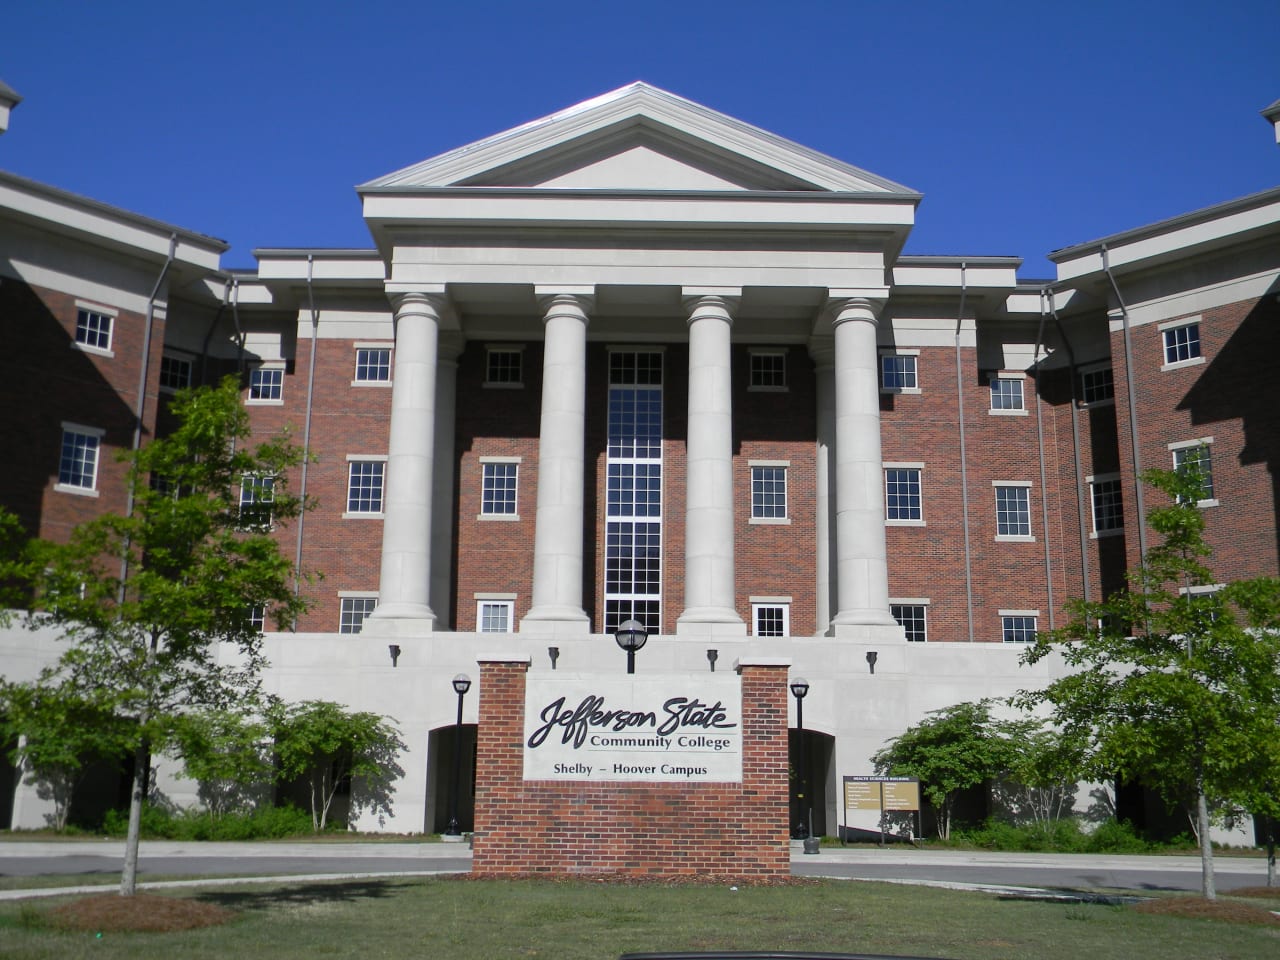 Jefferson State Community College Associate of Science in Engineering